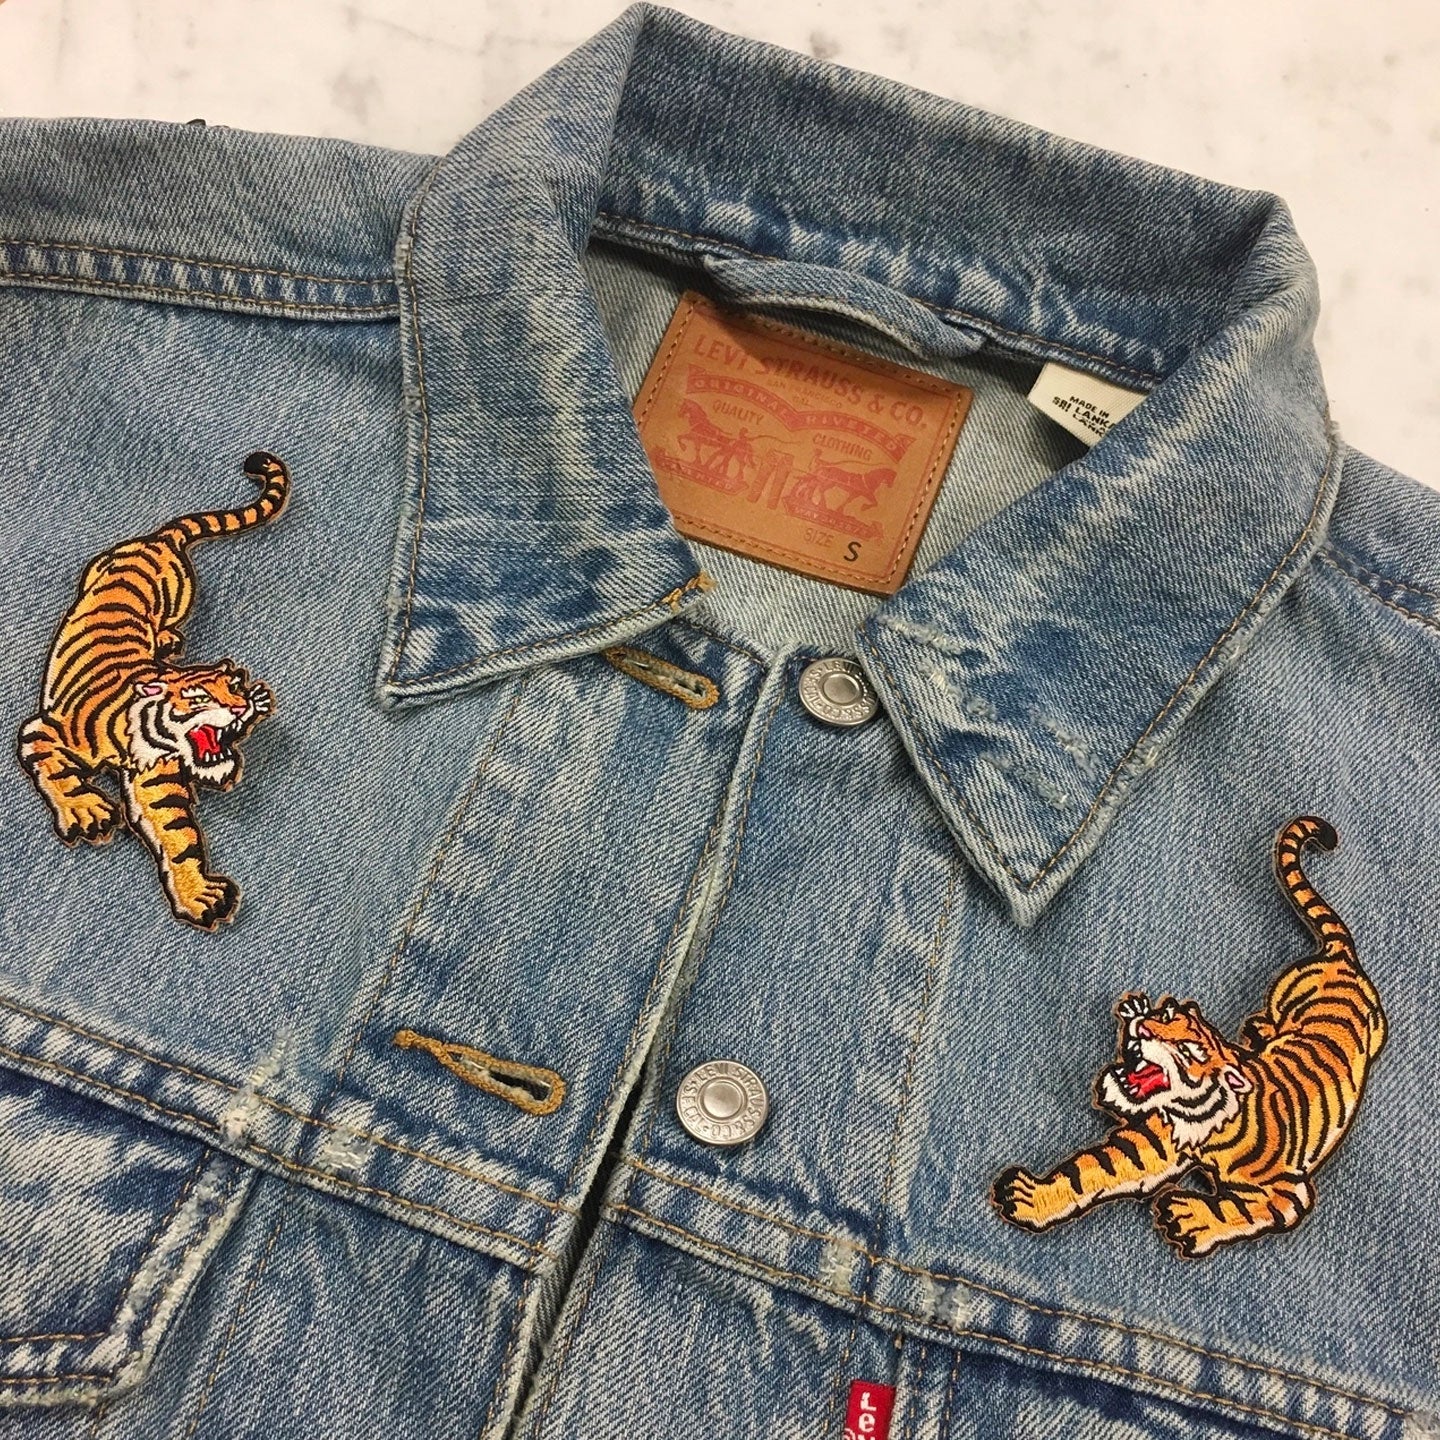 Tiger Iron-On Patches (Set of 2)